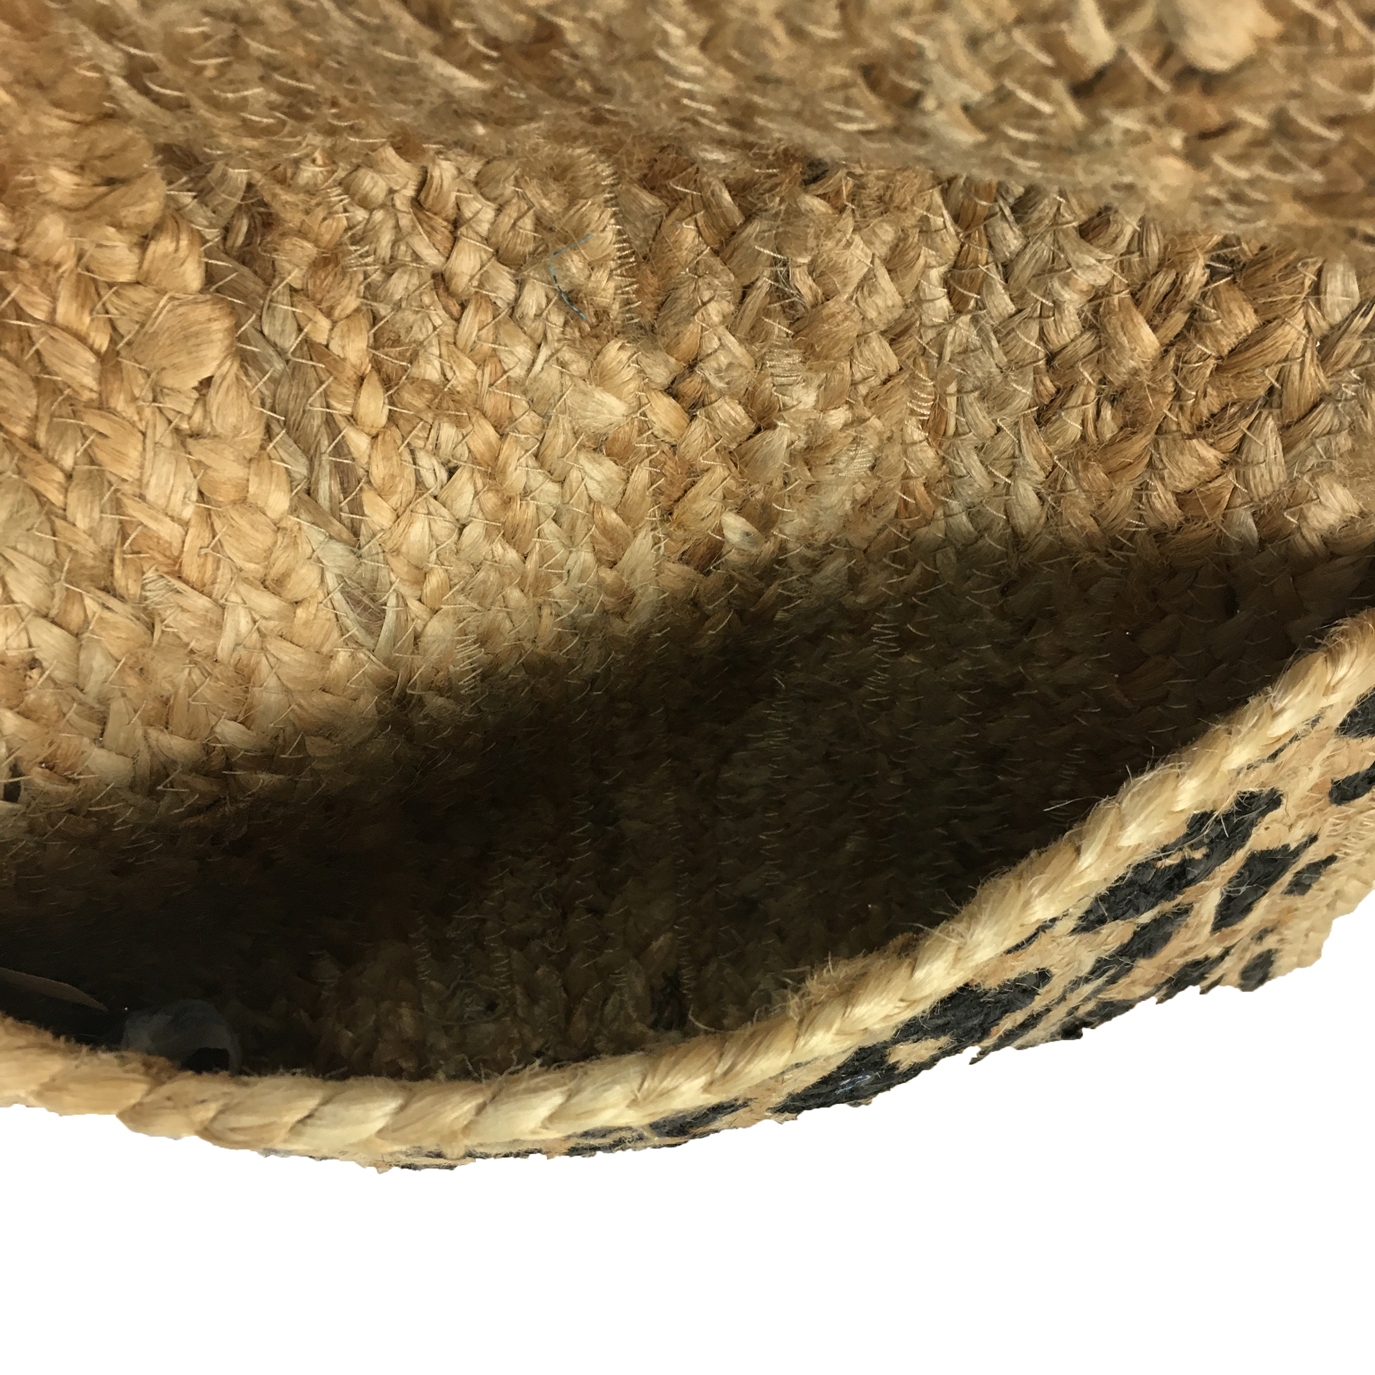 Magid Leopard Print Woven Jute Straw Clutch, Natural - image 3 of 3